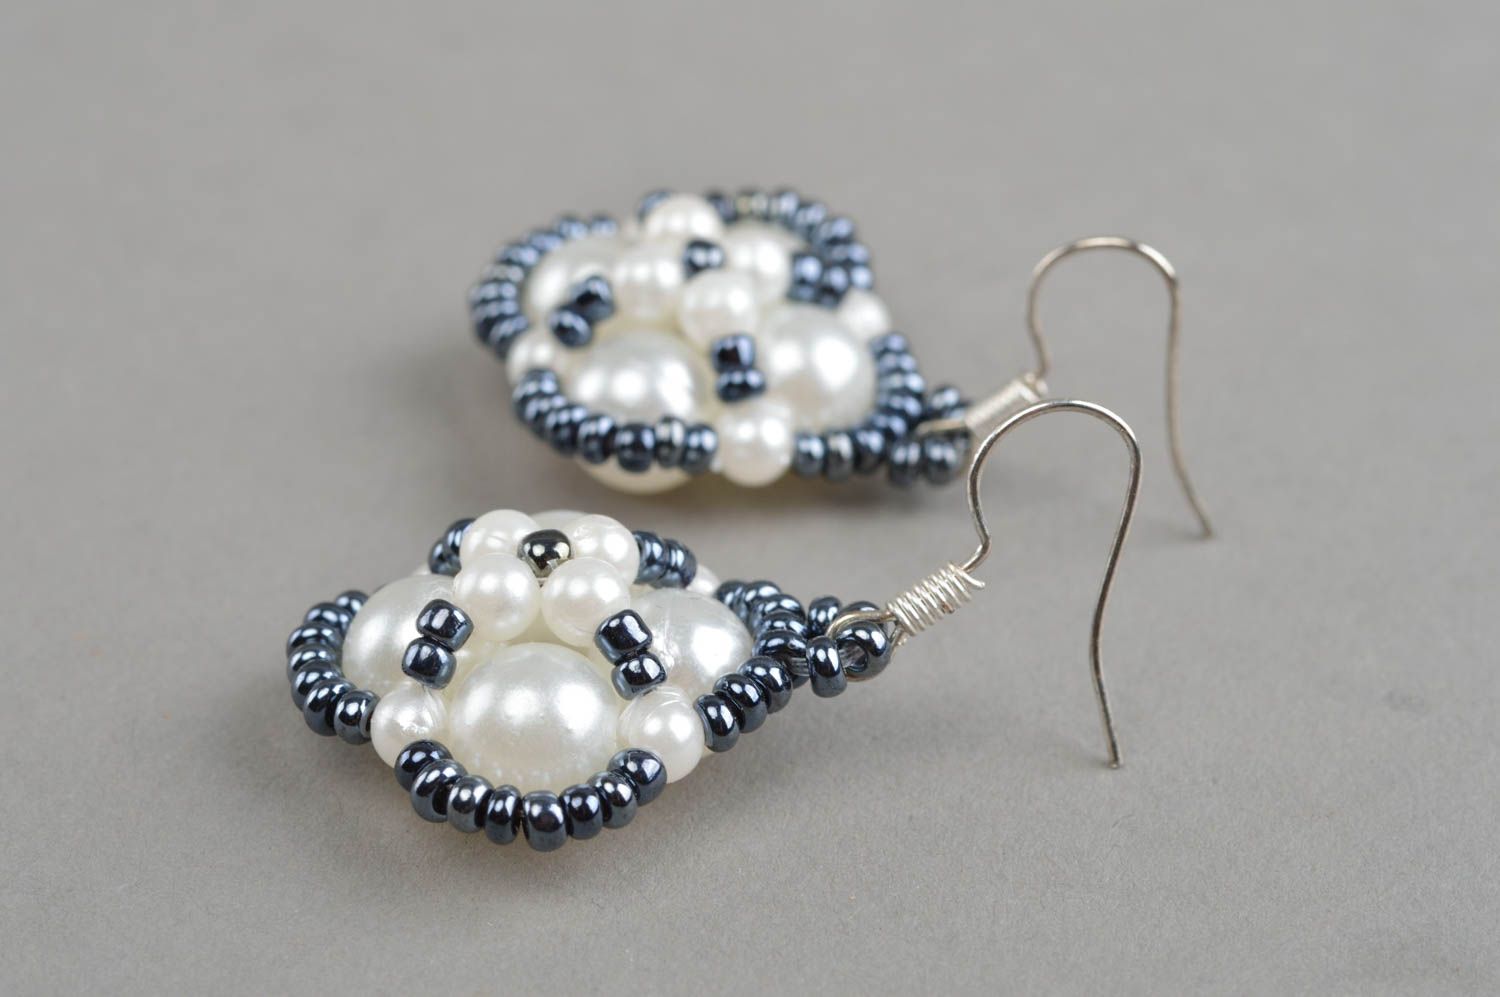 Stylish handcrafted beaded earrings fashion accessories bead weaving ideas photo 3